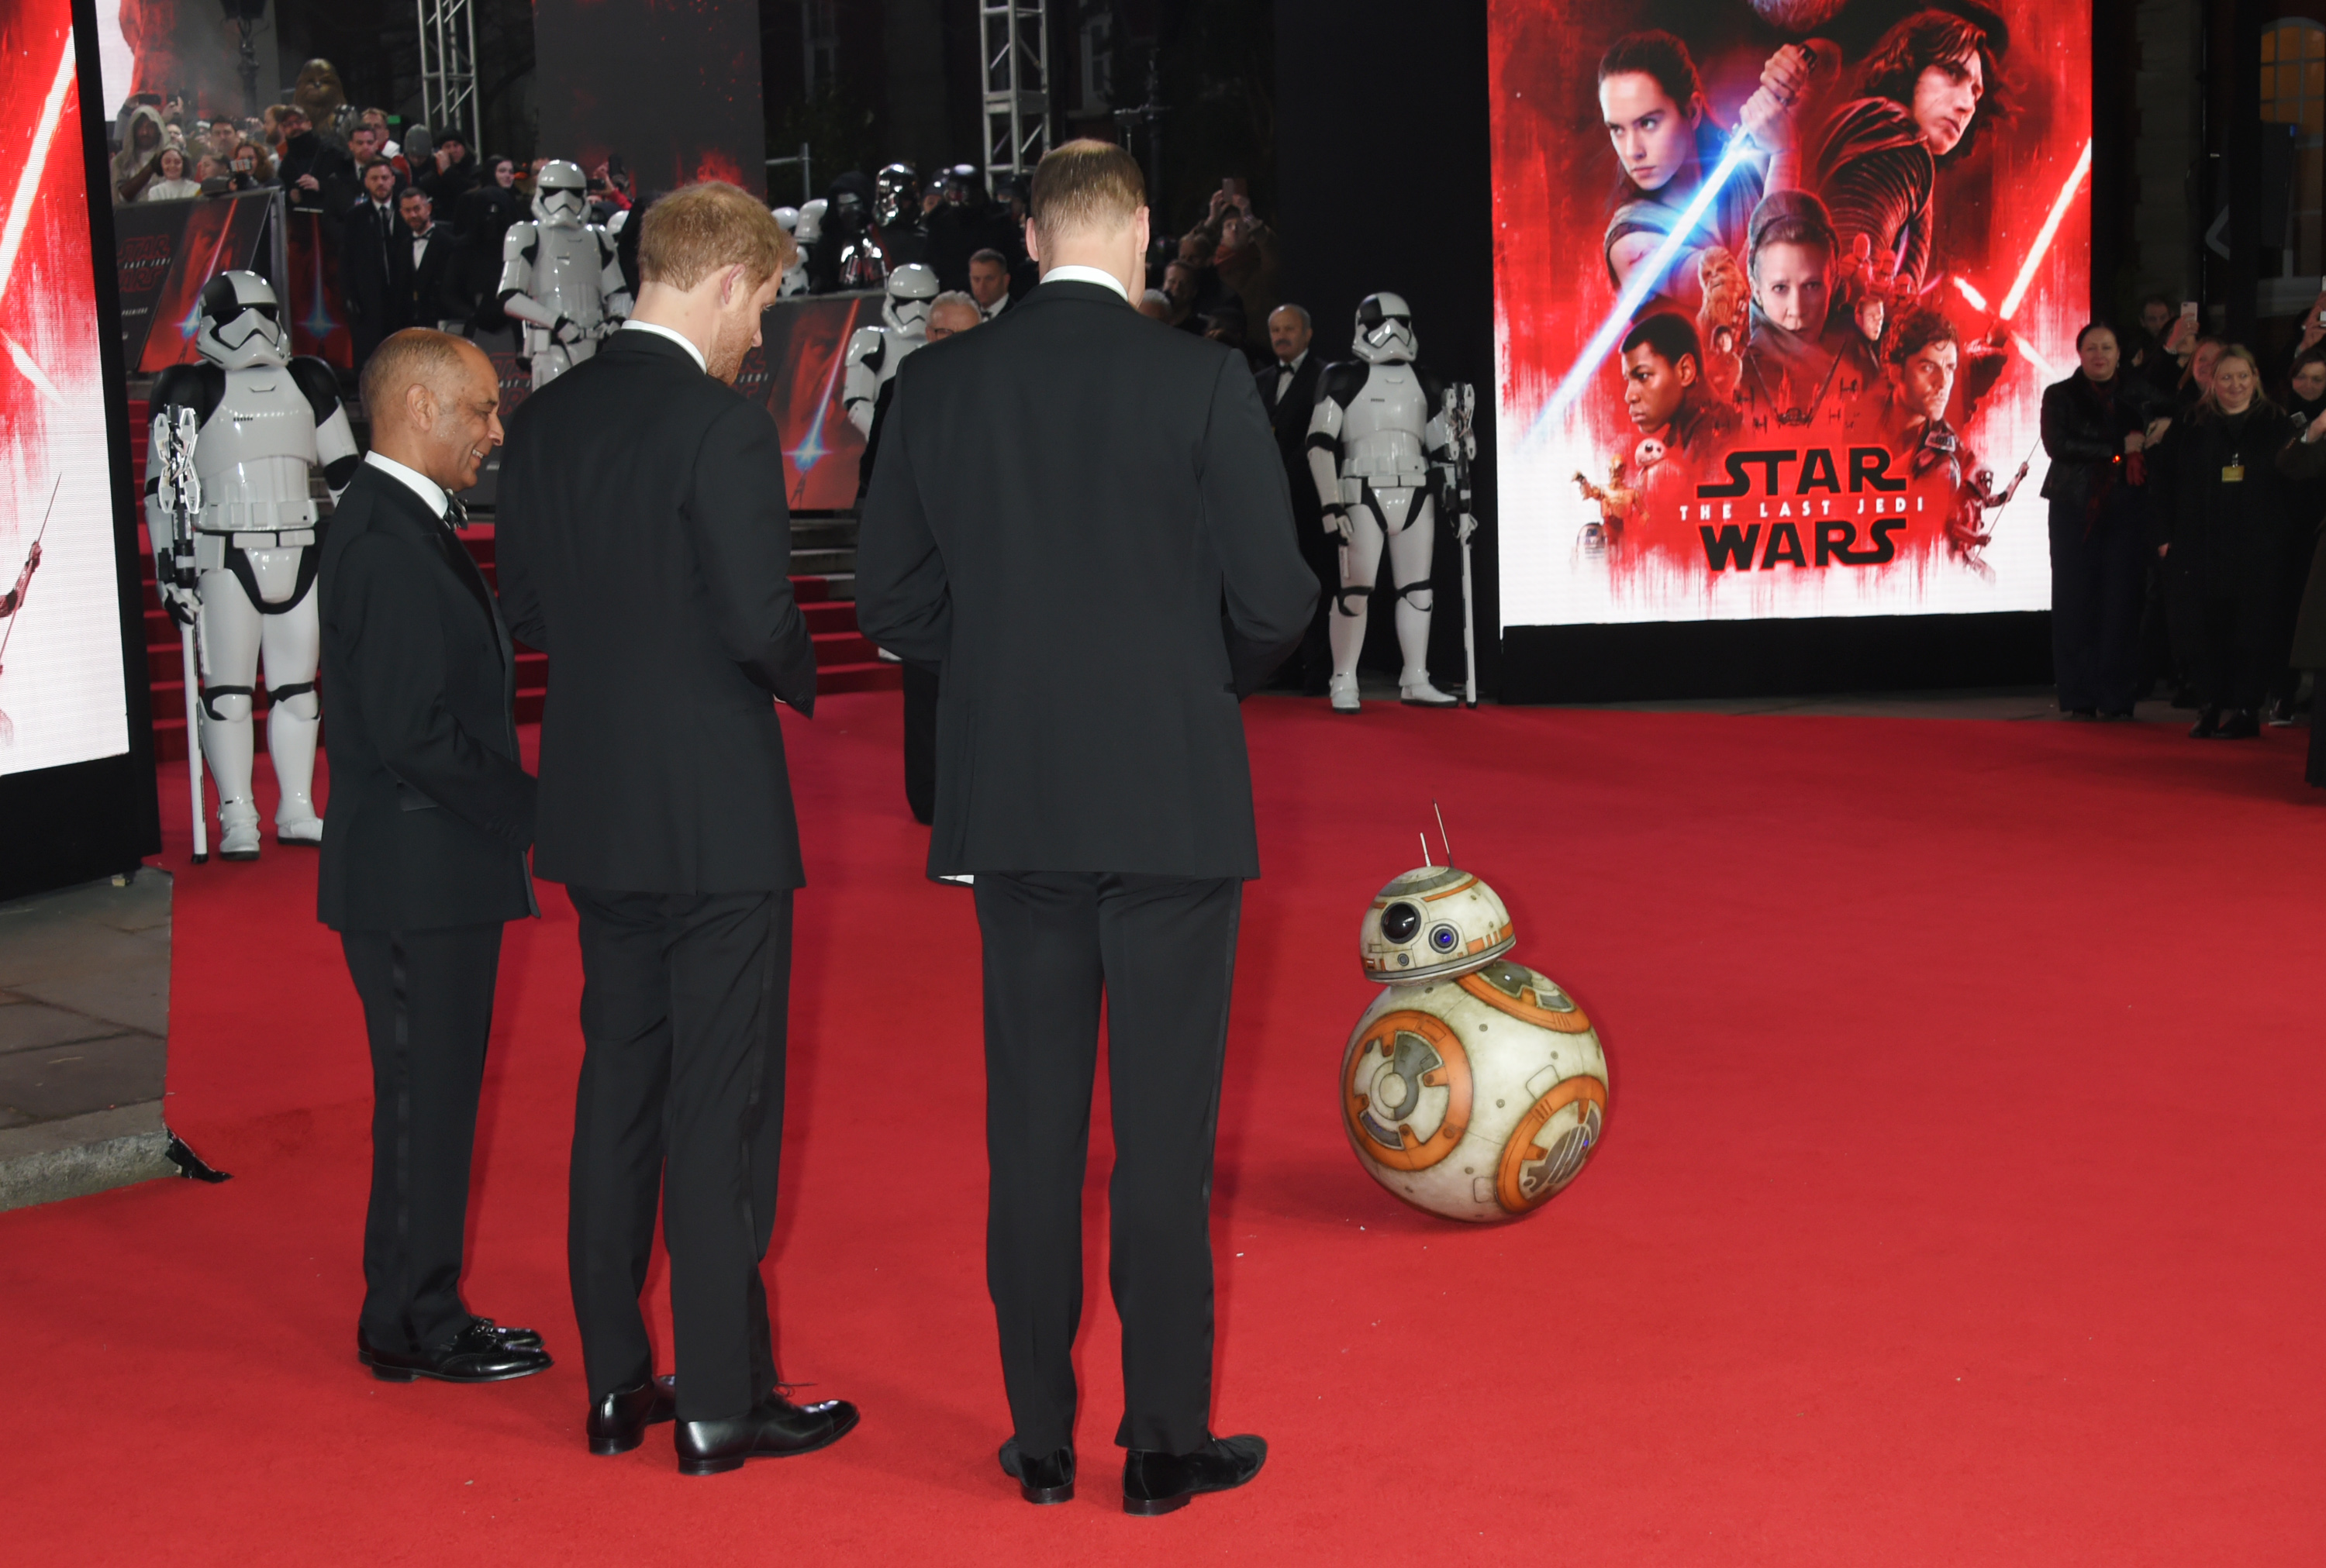 Prince William, Duke of Cambridge, and Prince Harry meet BB-8 at the European Premiere of "Star Wars: The Last Jedi" at the Royal Albert Hall on December 12, 2017 in London, England. (David M. Benett—Dave Benett/WireImage)